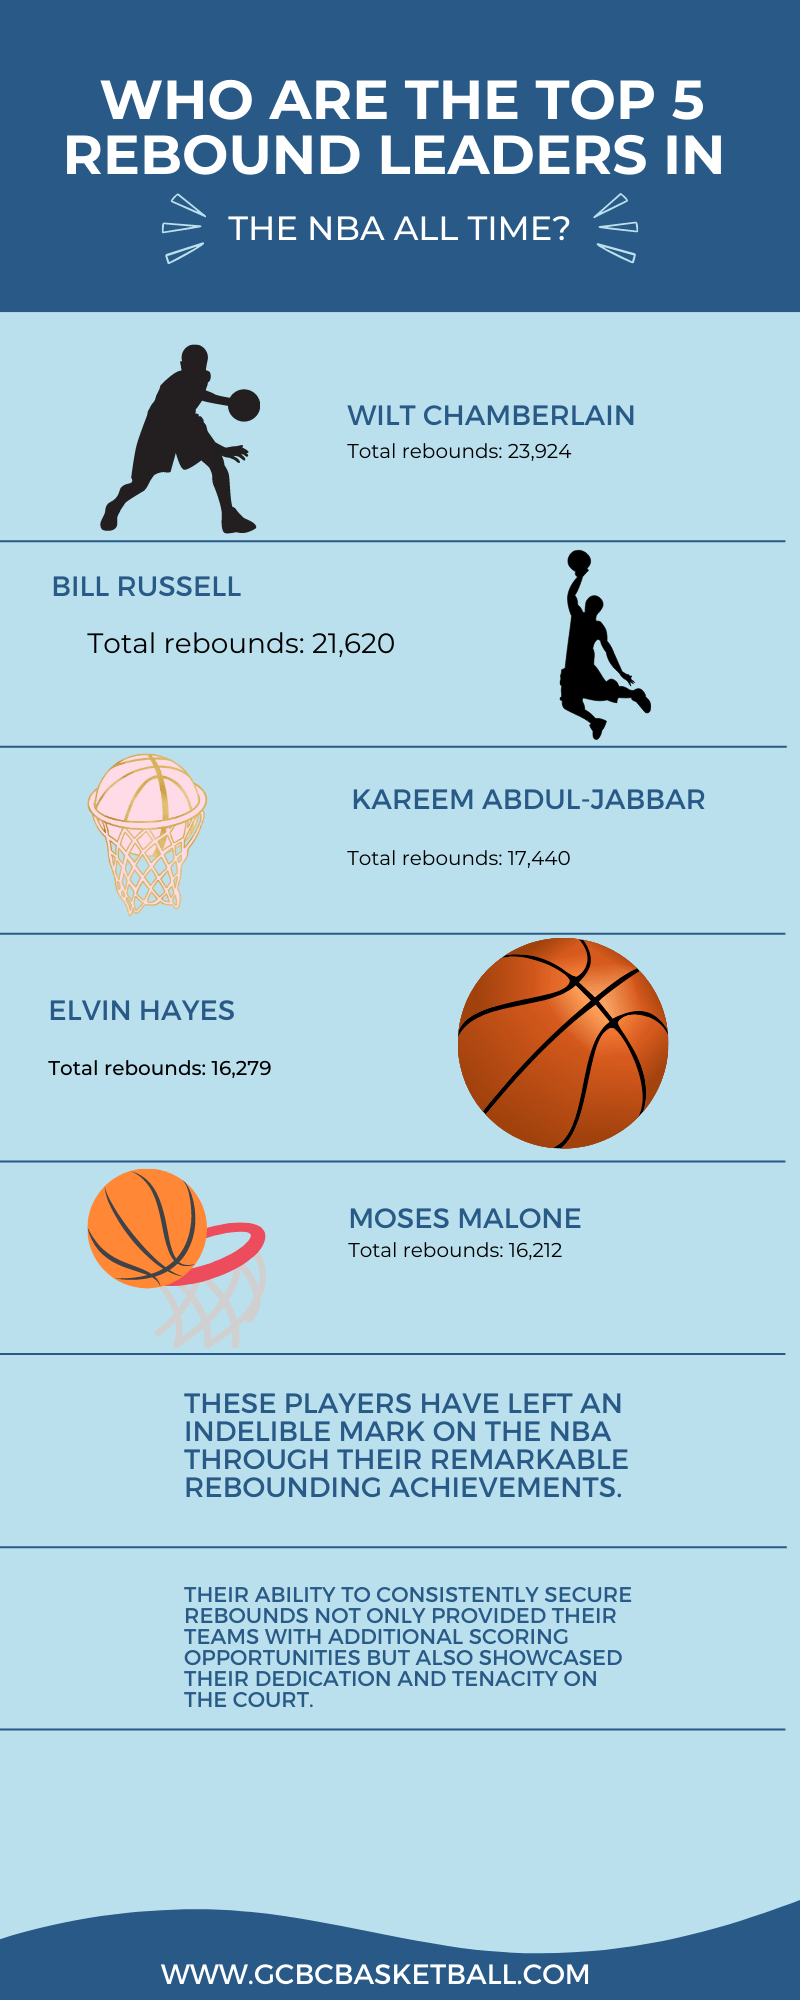 Who Are The Top 5 Rebound Leaders In The NBA All Time?